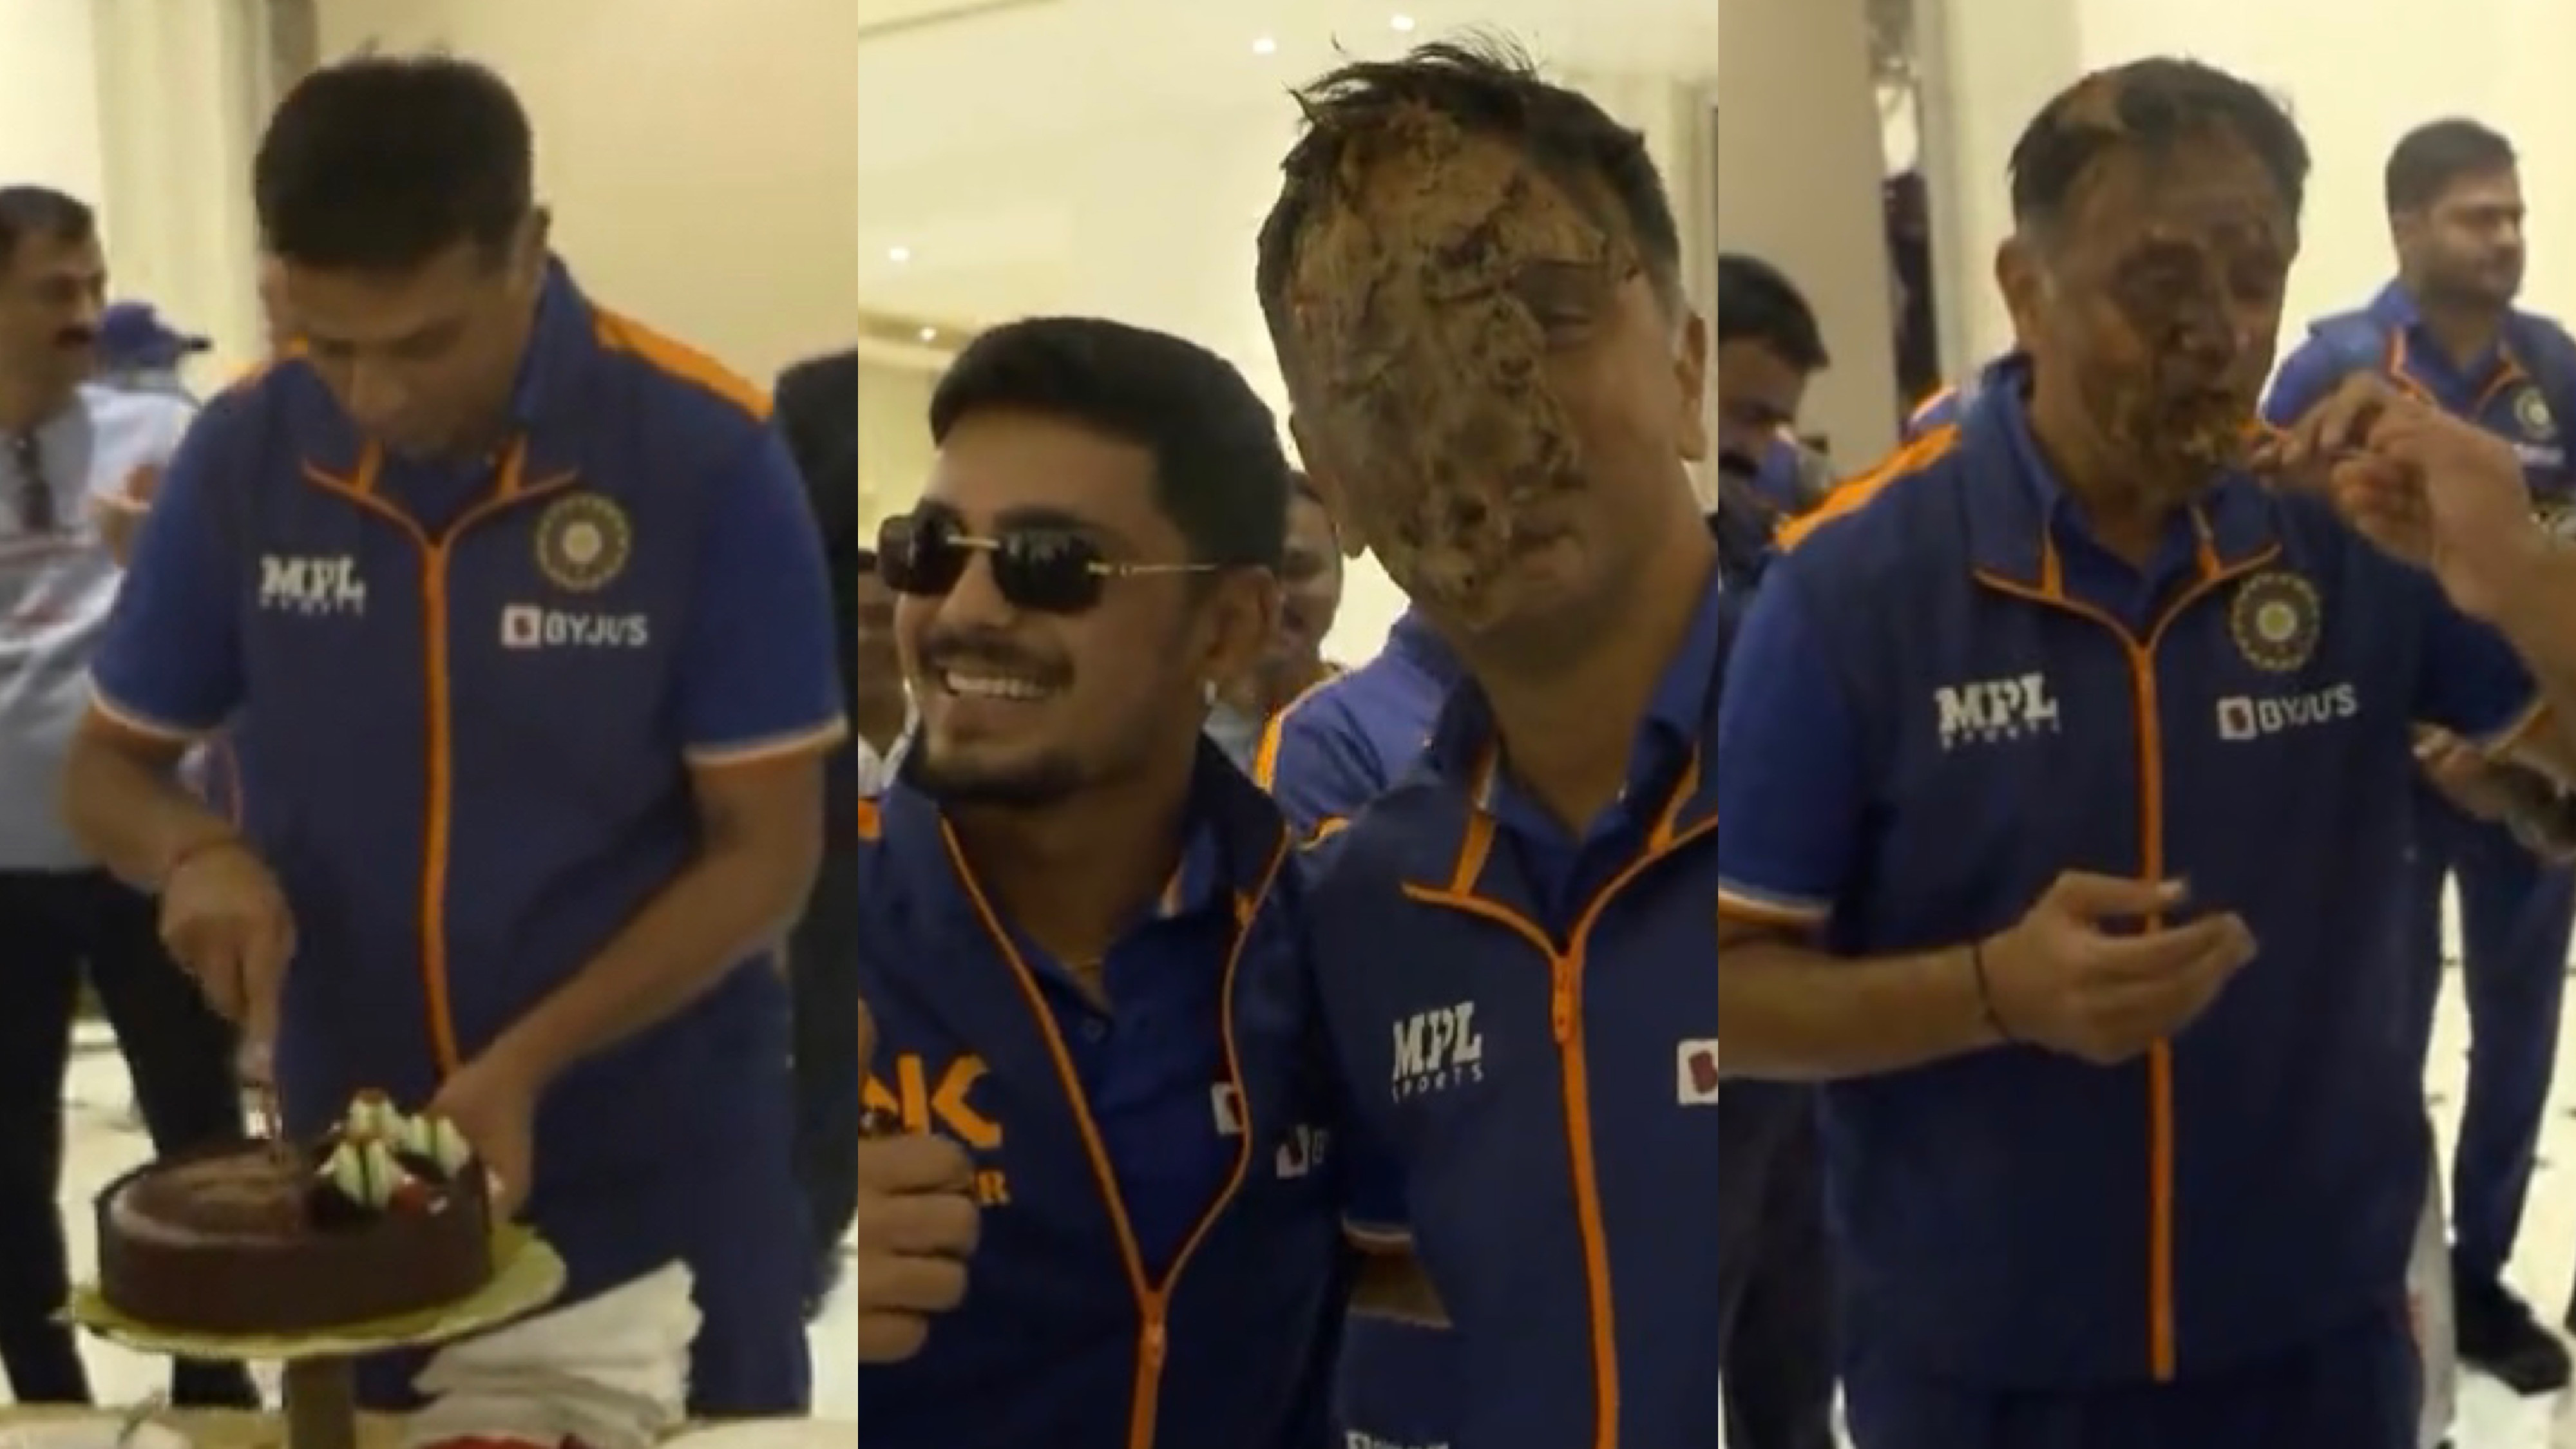 IND v SL 2023: WATCH - Rahul Dravid celebrates his 50th birthday with Team India after arrival in Kolkata